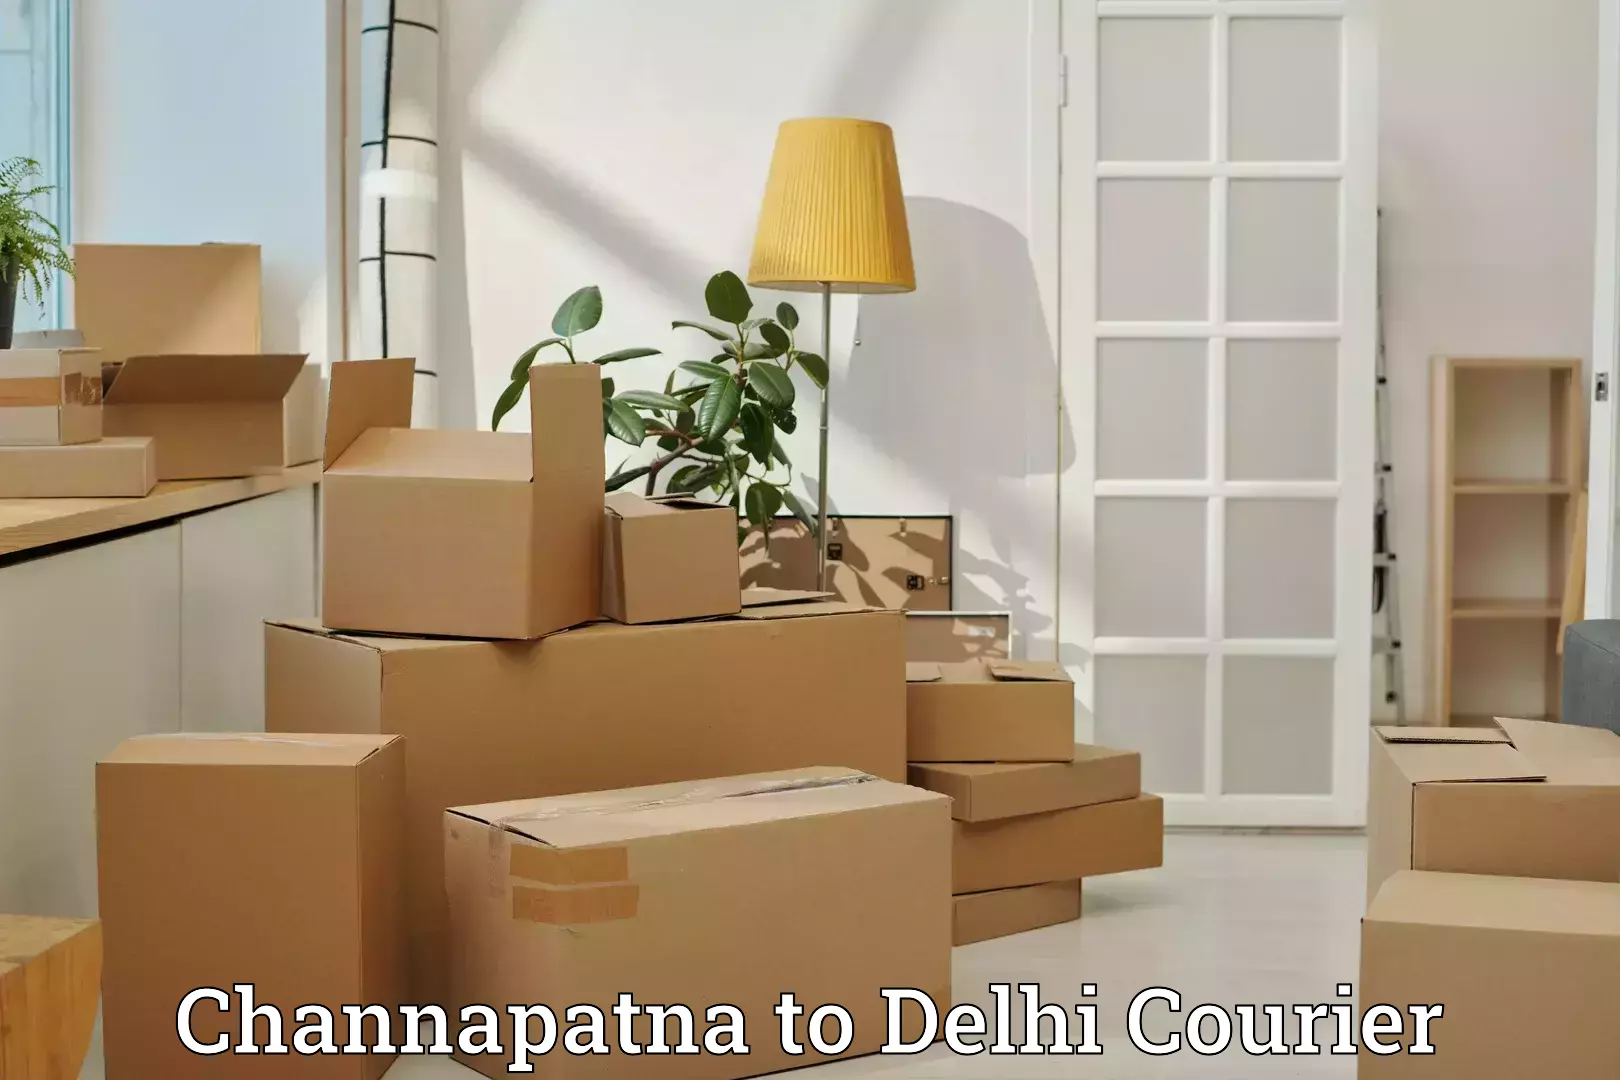 Luggage shipment specialists Channapatna to University of Delhi